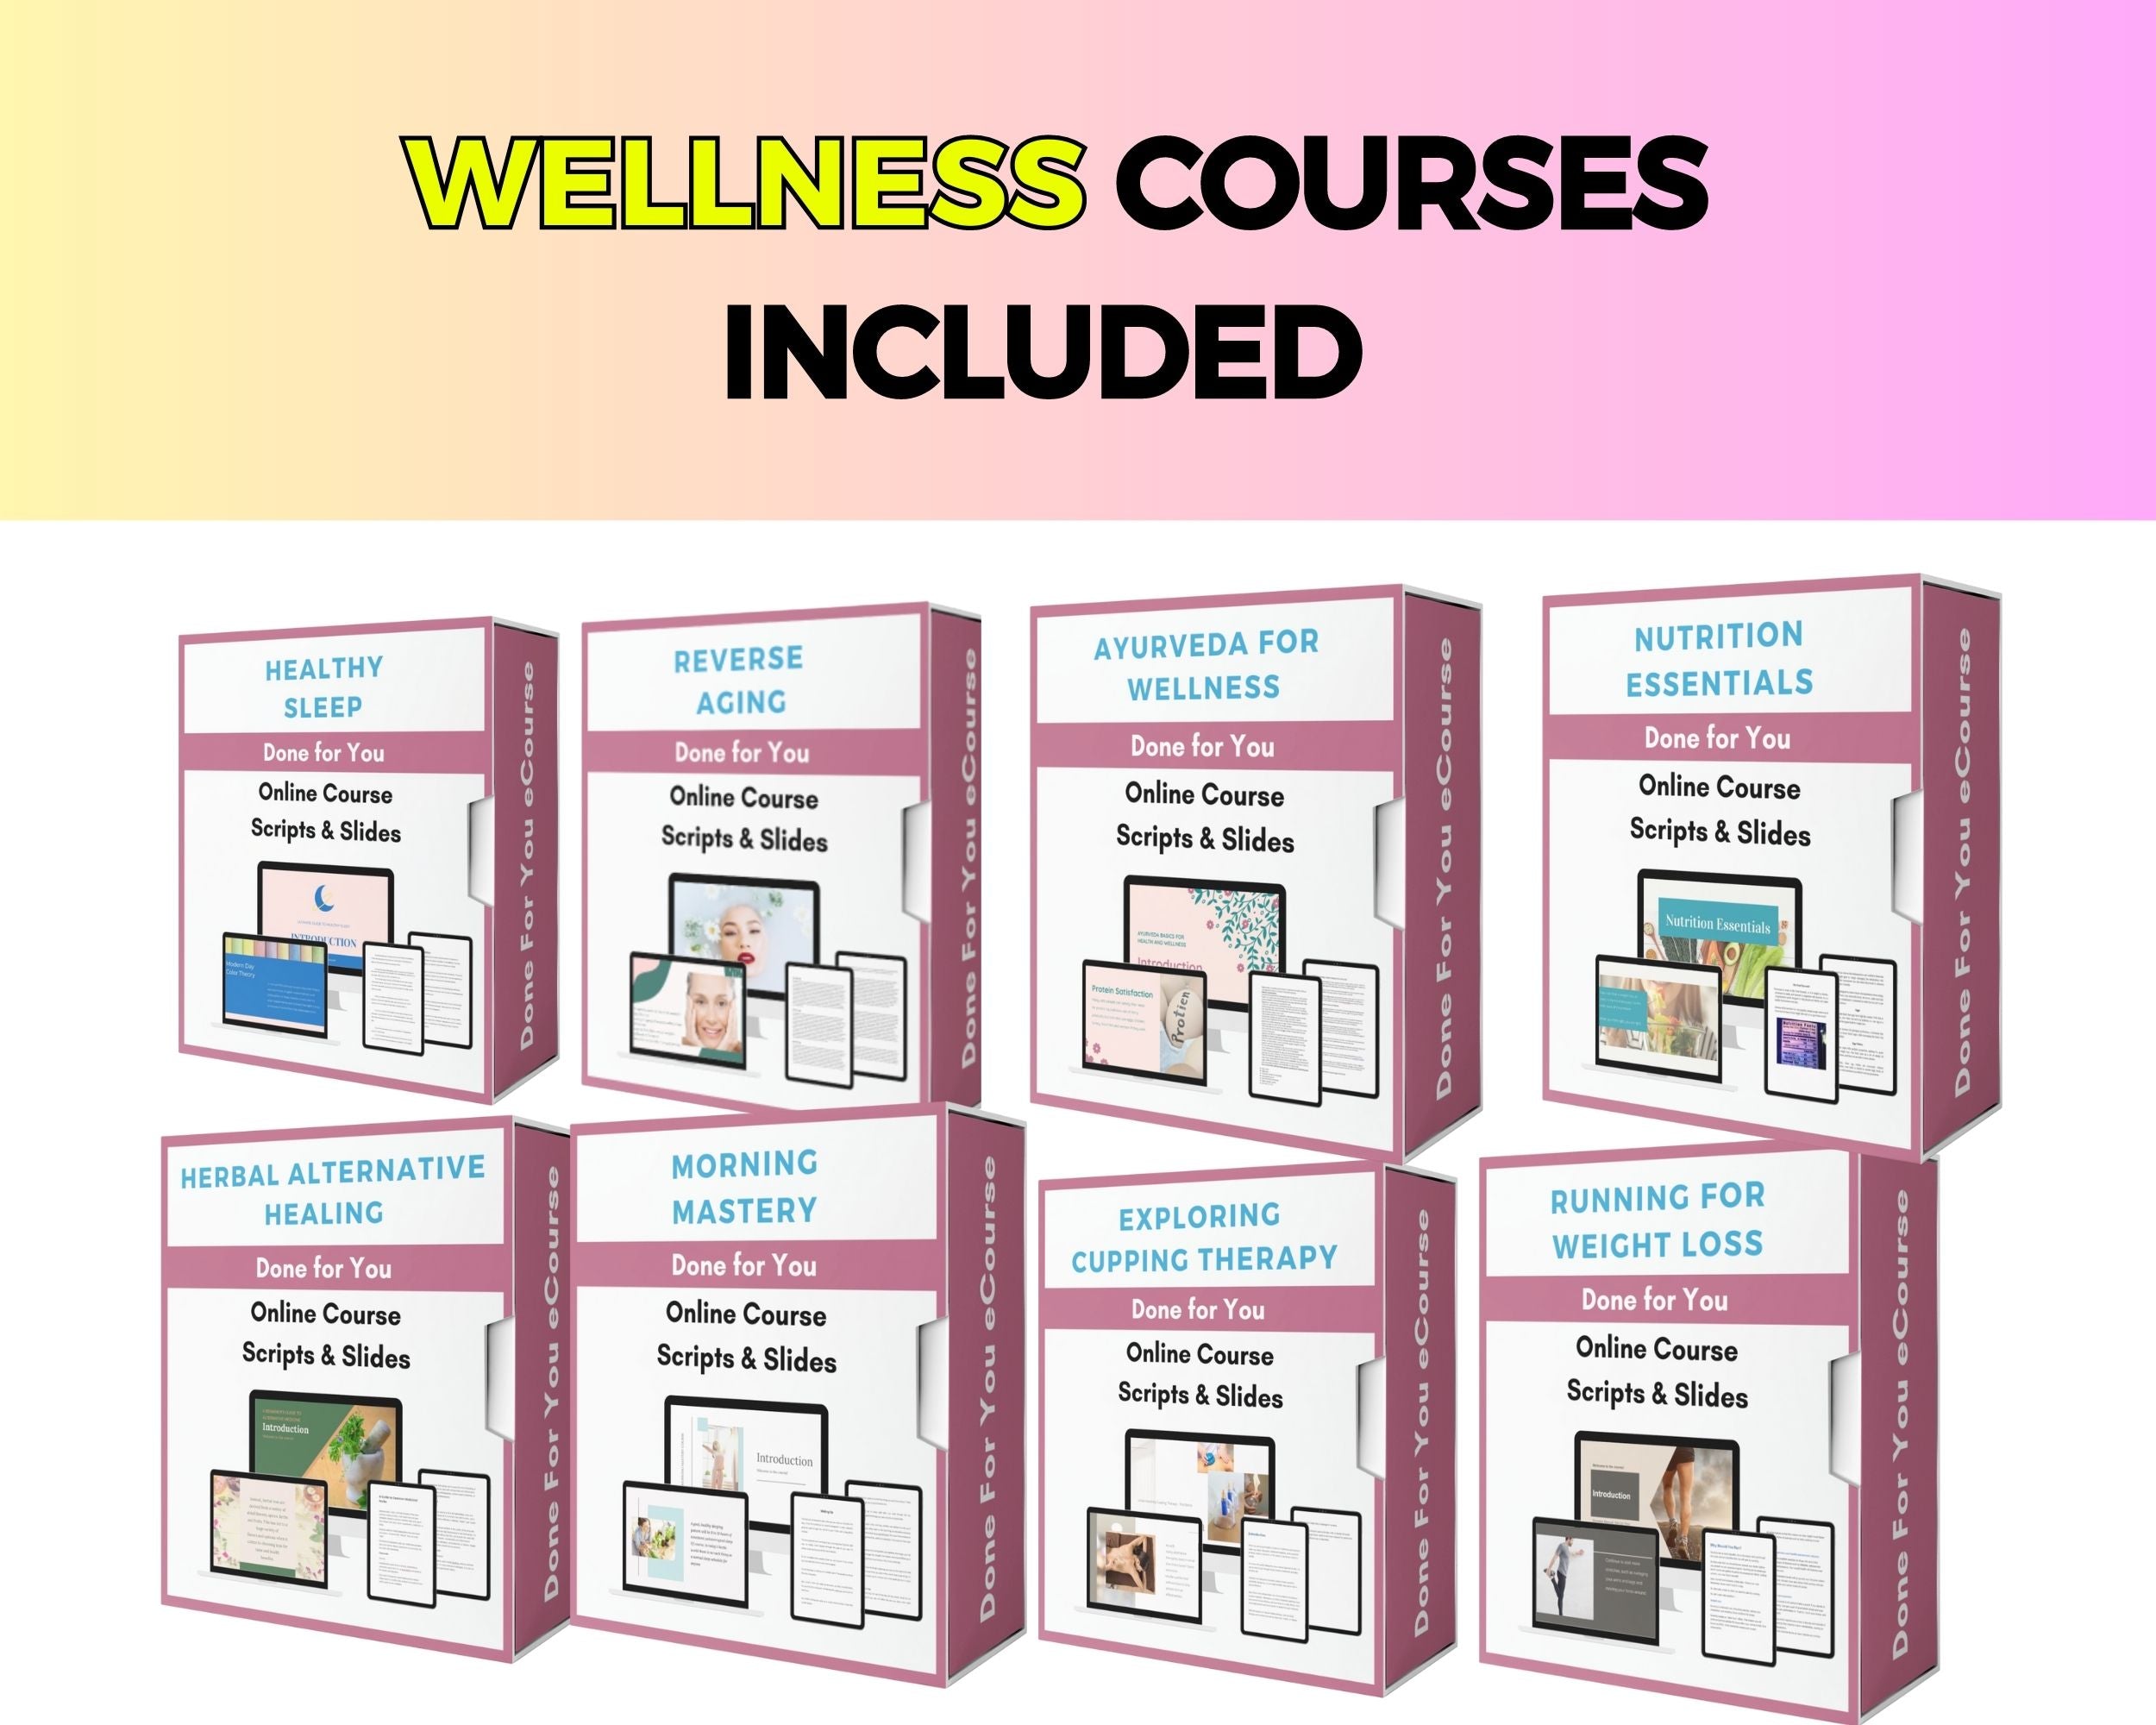 BUNDLE of 19 Wellness and Spirituality Courses | Lessons in Google Docs | Done for You Canva Slides